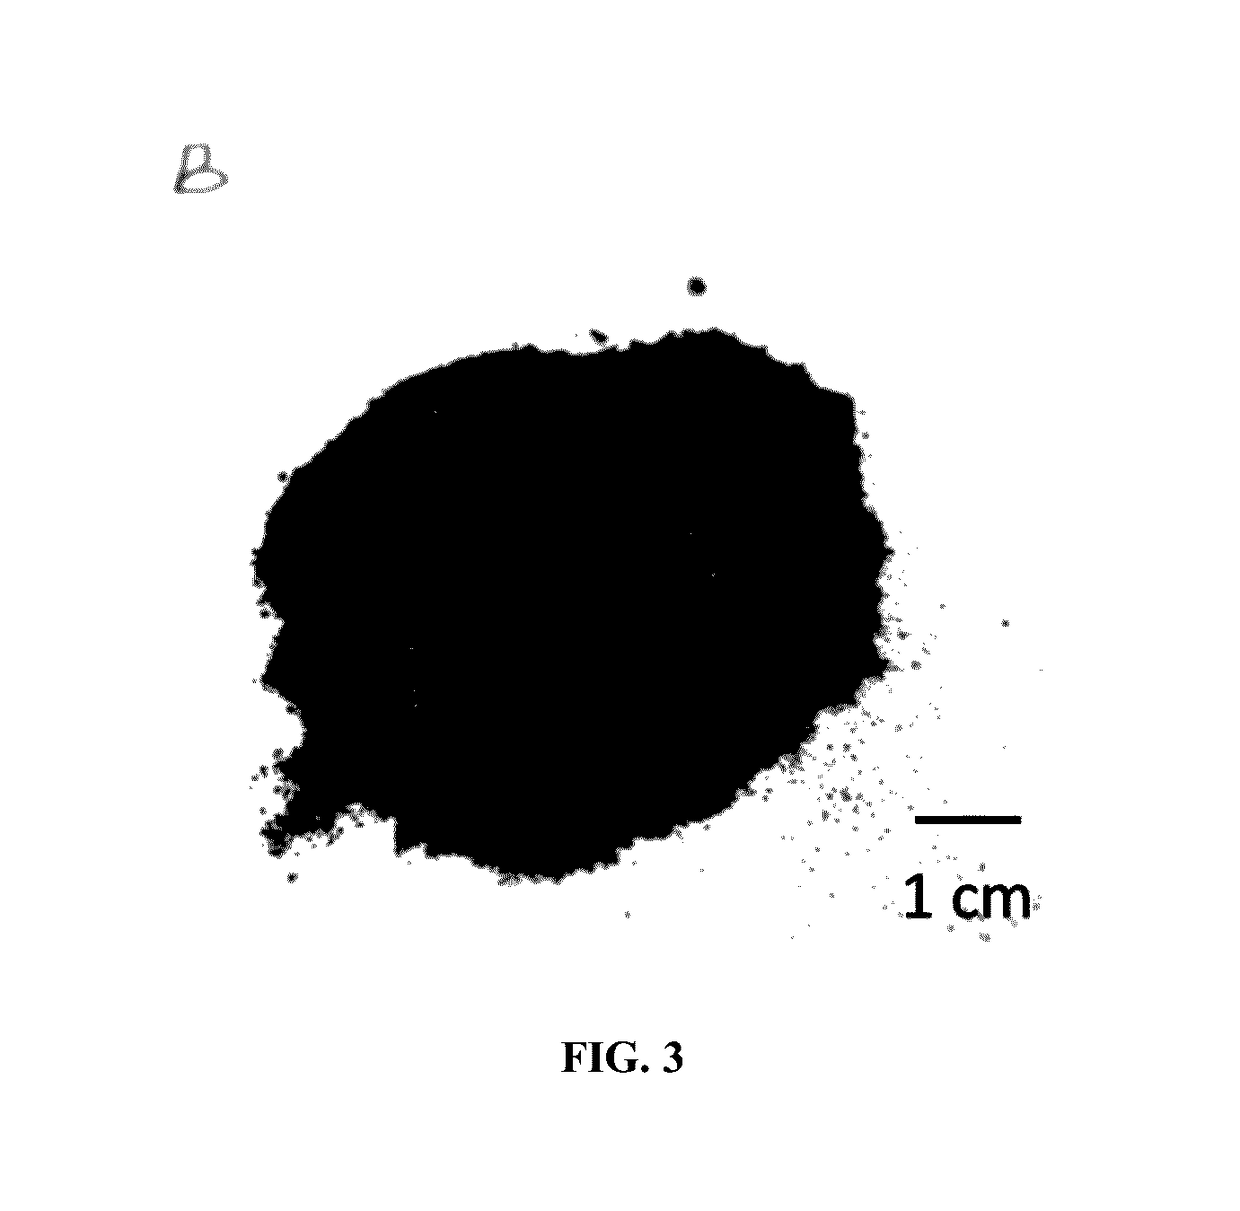 Powder coating compositions for reducing friction and wear in high temperature high pressure applications